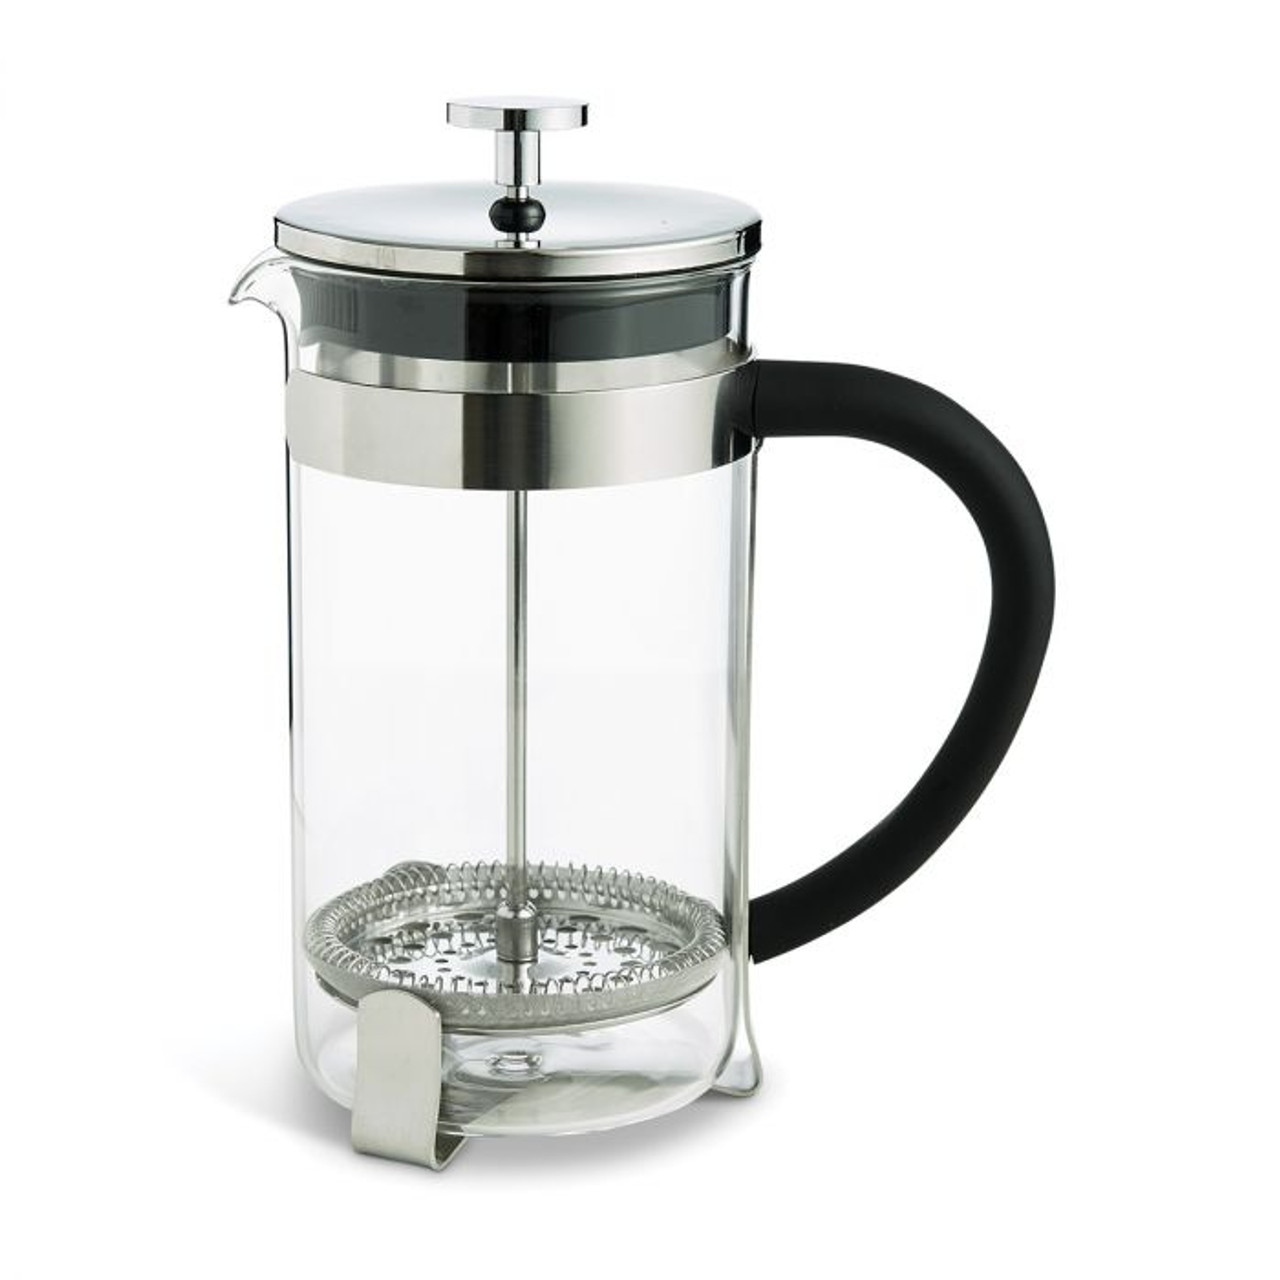 Fino Stainless Steel/Glass French Press, 8 Cup/34 oz - Fante's